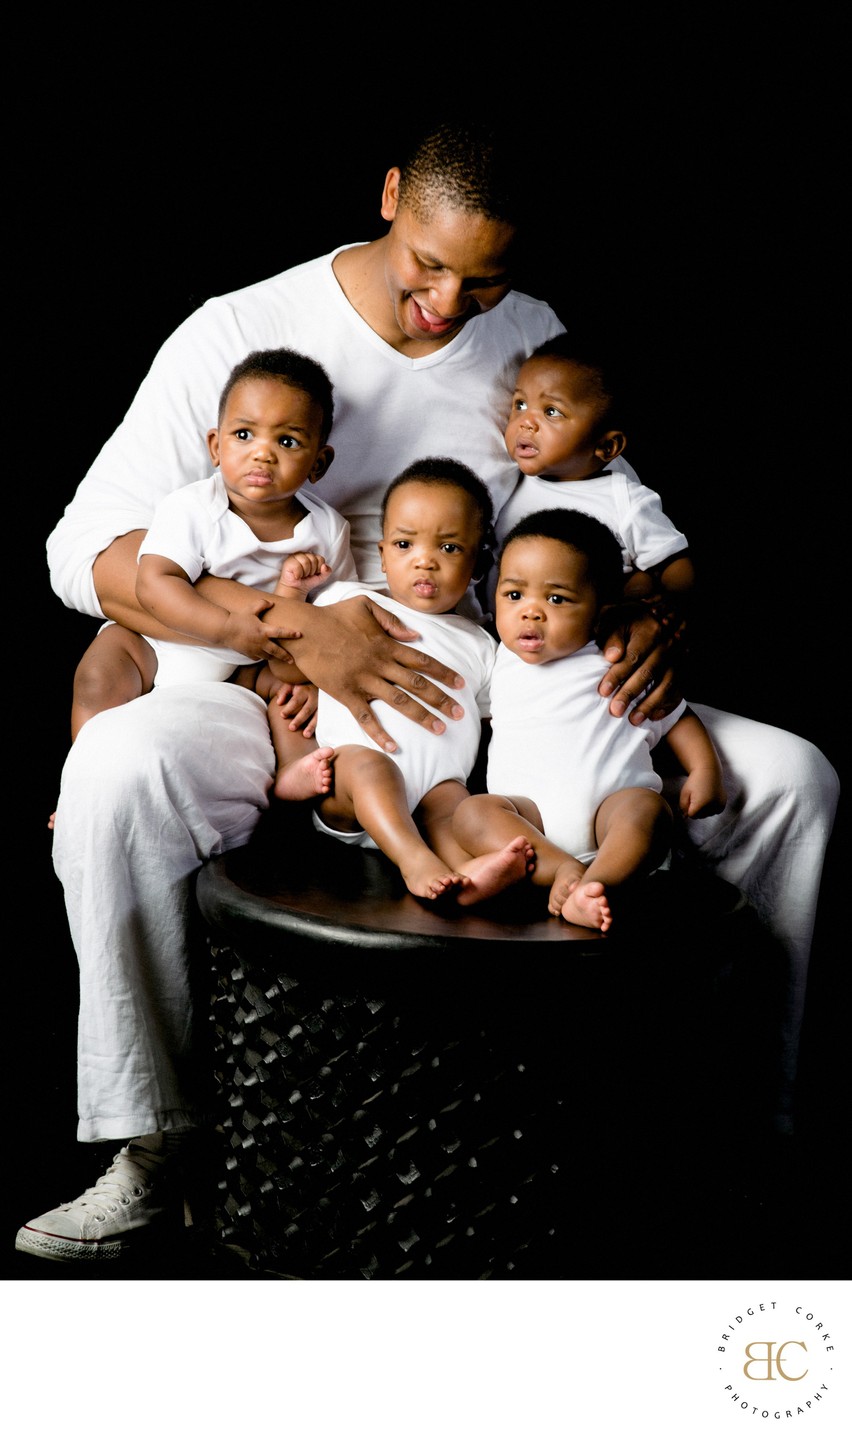 Father With Quadruplets